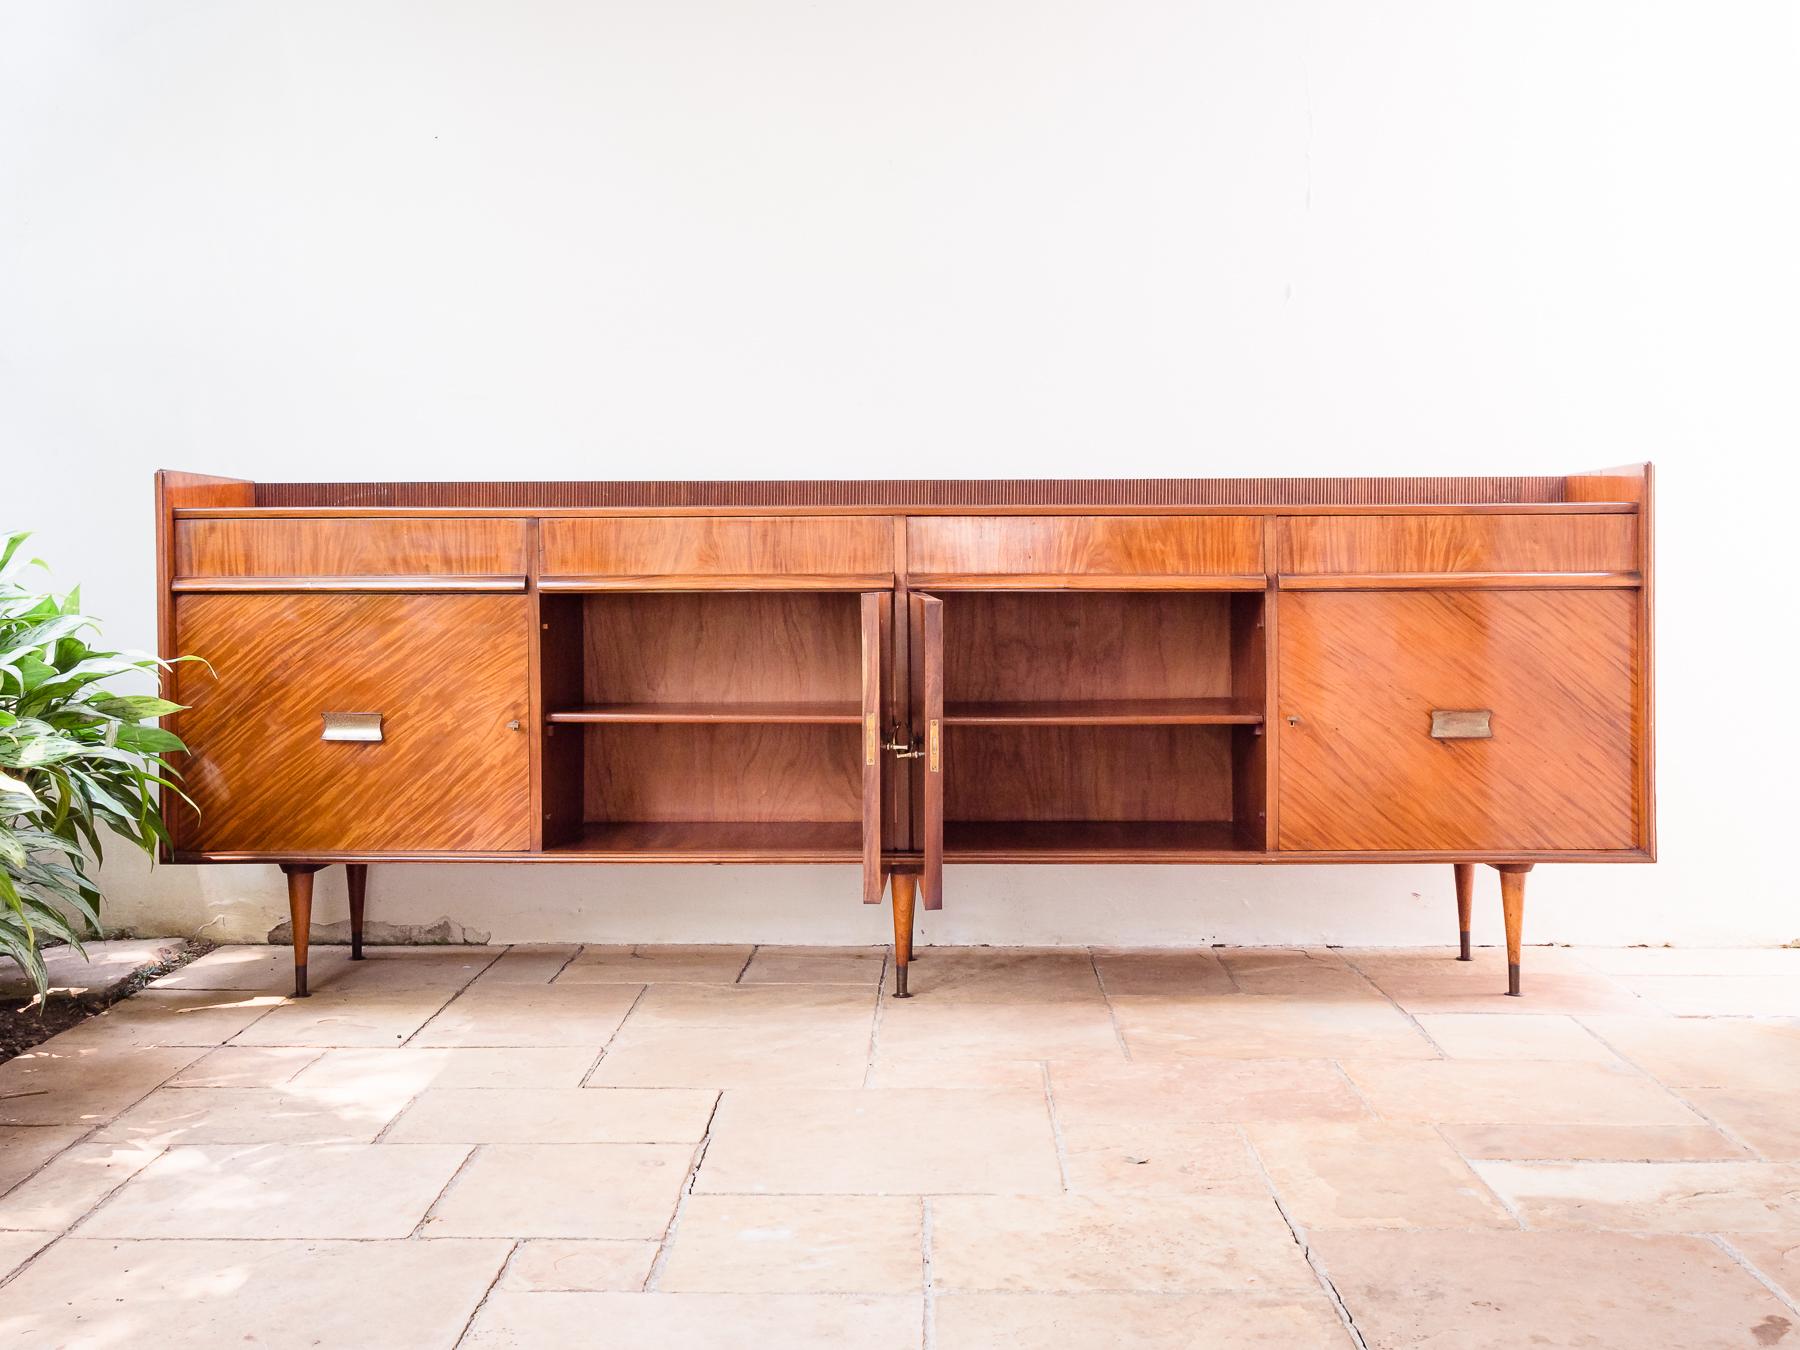 Brazilian Mid-Century Modern sideboard, in Caviúna hardwood, designed by Italian-born designer Giuseppe Scapinelli, circa 1955. Four doors and four drawers, brass feet.
This exquisite and big sideboard was designed by Giuseppe Scapinelli in the